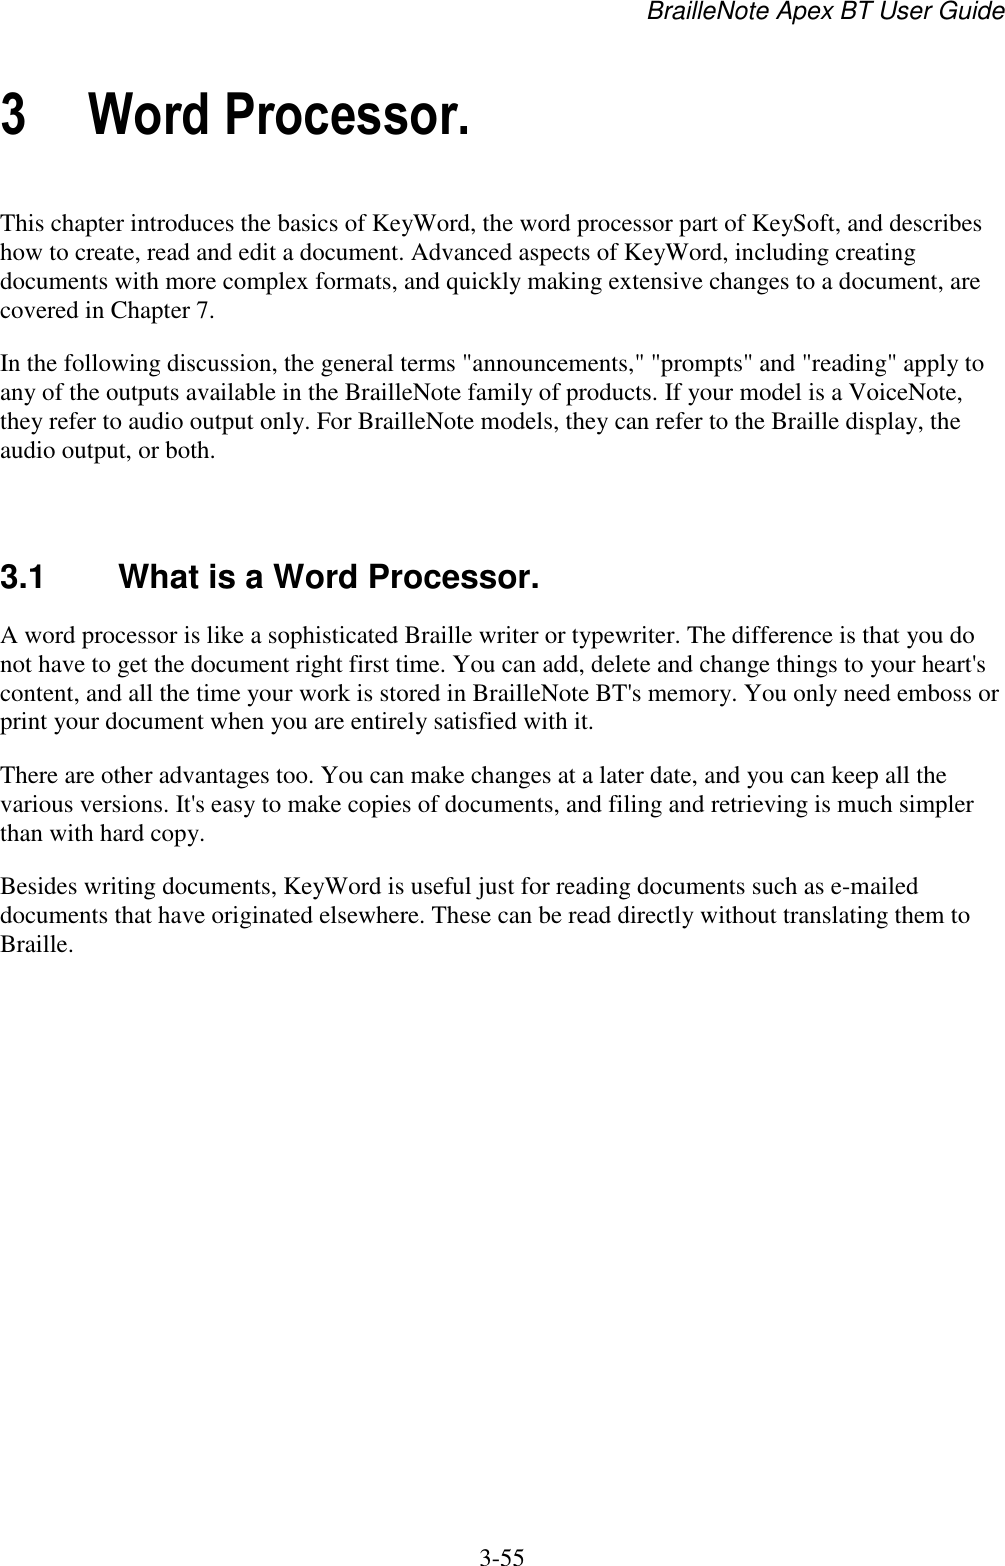 BrailleNote Apex BT User Guide   3-55   3 Word Processor. This chapter introduces the basics of KeyWord, the word processor part of KeySoft, and describes how to create, read and edit a document. Advanced aspects of KeyWord, including creating documents with more complex formats, and quickly making extensive changes to a document, are covered in Chapter 7. In the following discussion, the general terms &quot;announcements,&quot; &quot;prompts&quot; and &quot;reading&quot; apply to any of the outputs available in the BrailleNote family of products. If your model is a VoiceNote, they refer to audio output only. For BrailleNote models, they can refer to the Braille display, the audio output, or both.   3.1  What is a Word Processor. A word processor is like a sophisticated Braille writer or typewriter. The difference is that you do not have to get the document right first time. You can add, delete and change things to your heart&apos;s content, and all the time your work is stored in BrailleNote BT&apos;s memory. You only need emboss or print your document when you are entirely satisfied with it. There are other advantages too. You can make changes at a later date, and you can keep all the various versions. It&apos;s easy to make copies of documents, and filing and retrieving is much simpler than with hard copy. Besides writing documents, KeyWord is useful just for reading documents such as e-mailed documents that have originated elsewhere. These can be read directly without translating them to Braille.   